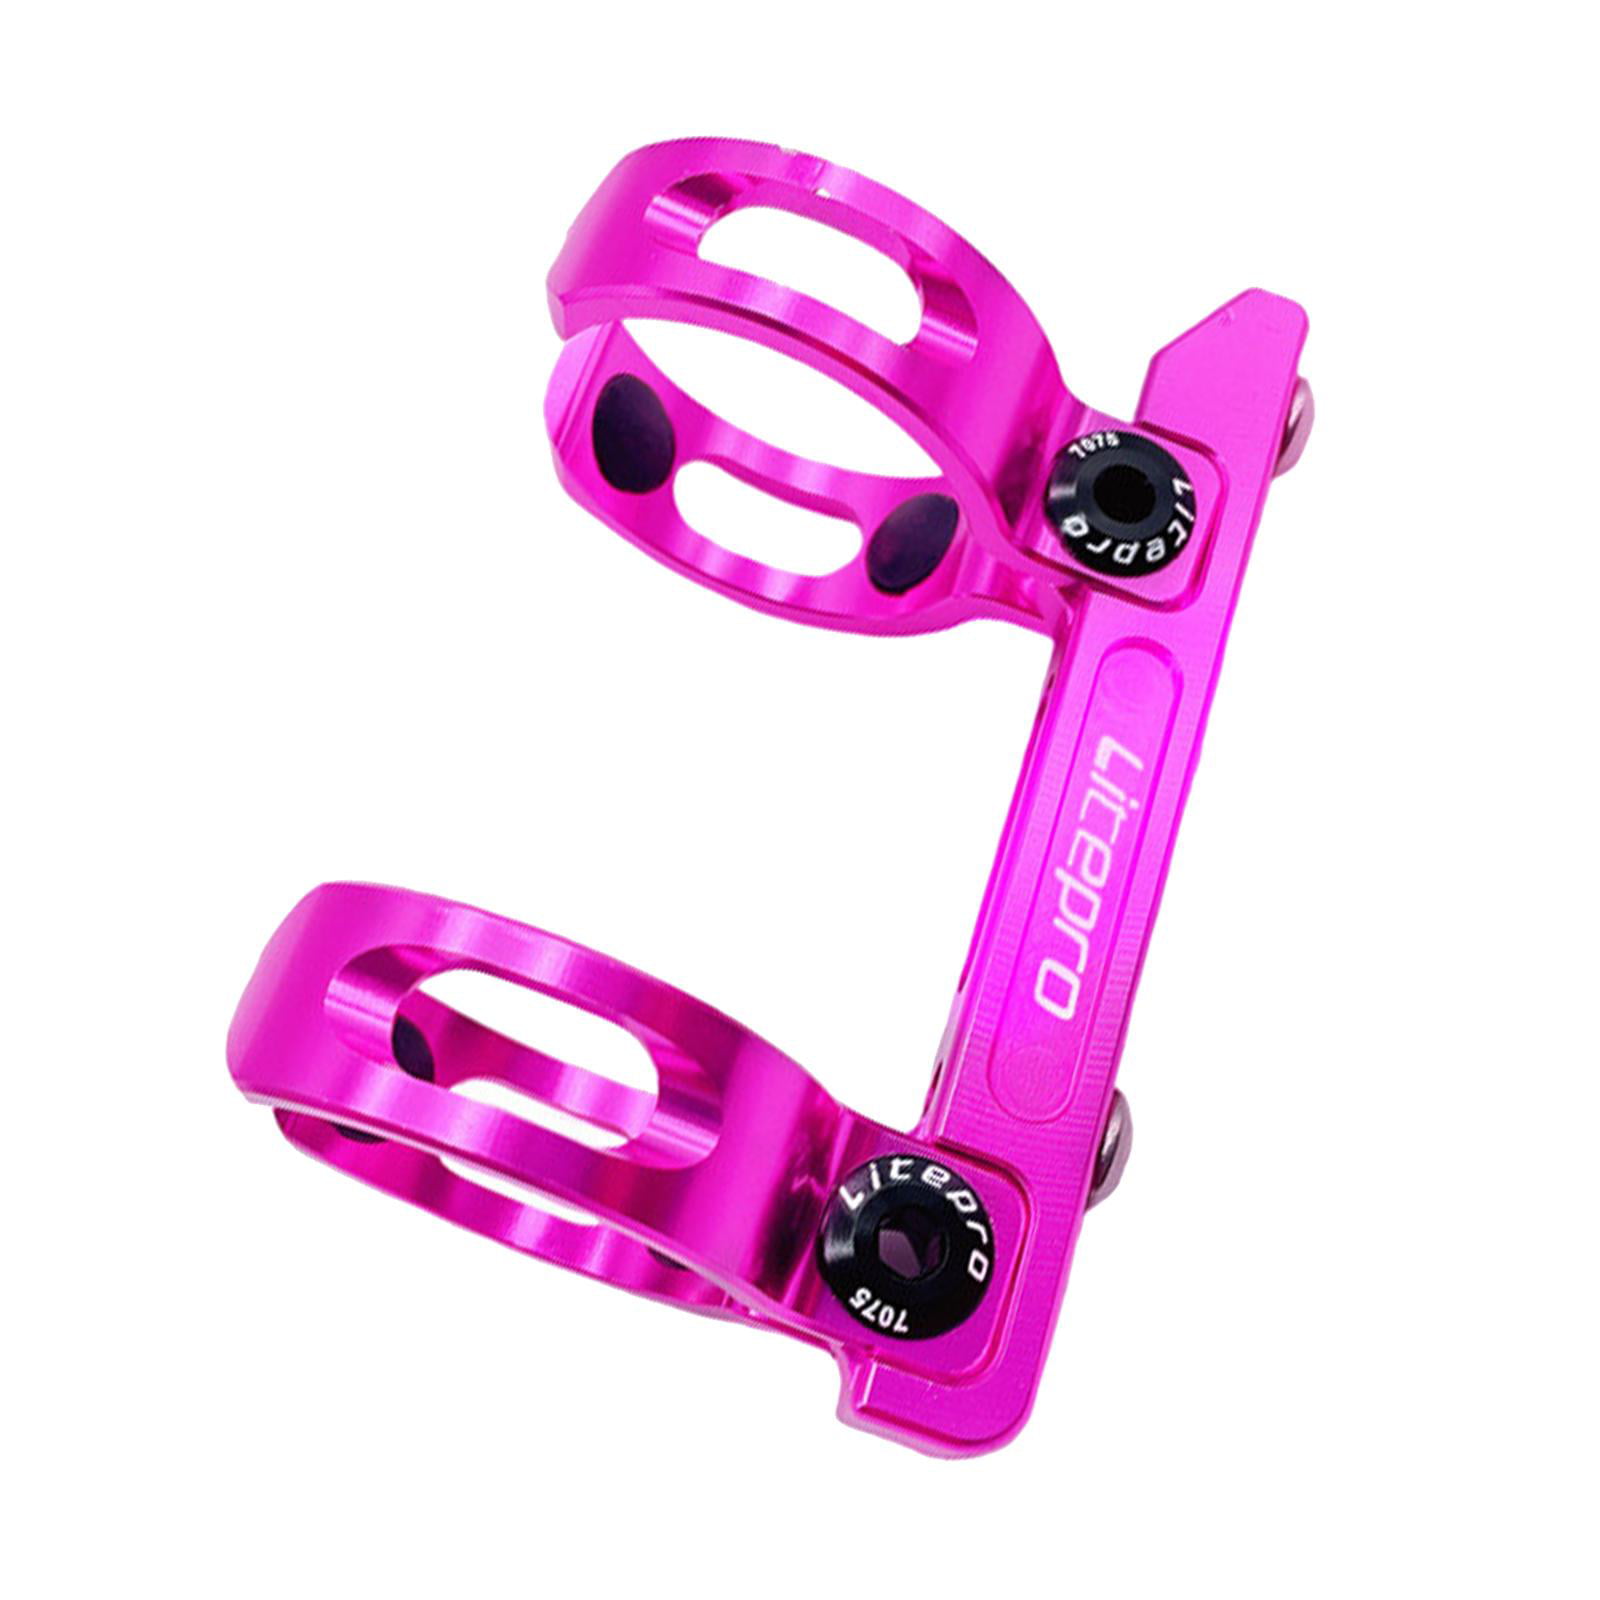 Durable Soft Cycling Bottle Holder Cup Mount Stable Trolley Cage Rack Cradle 